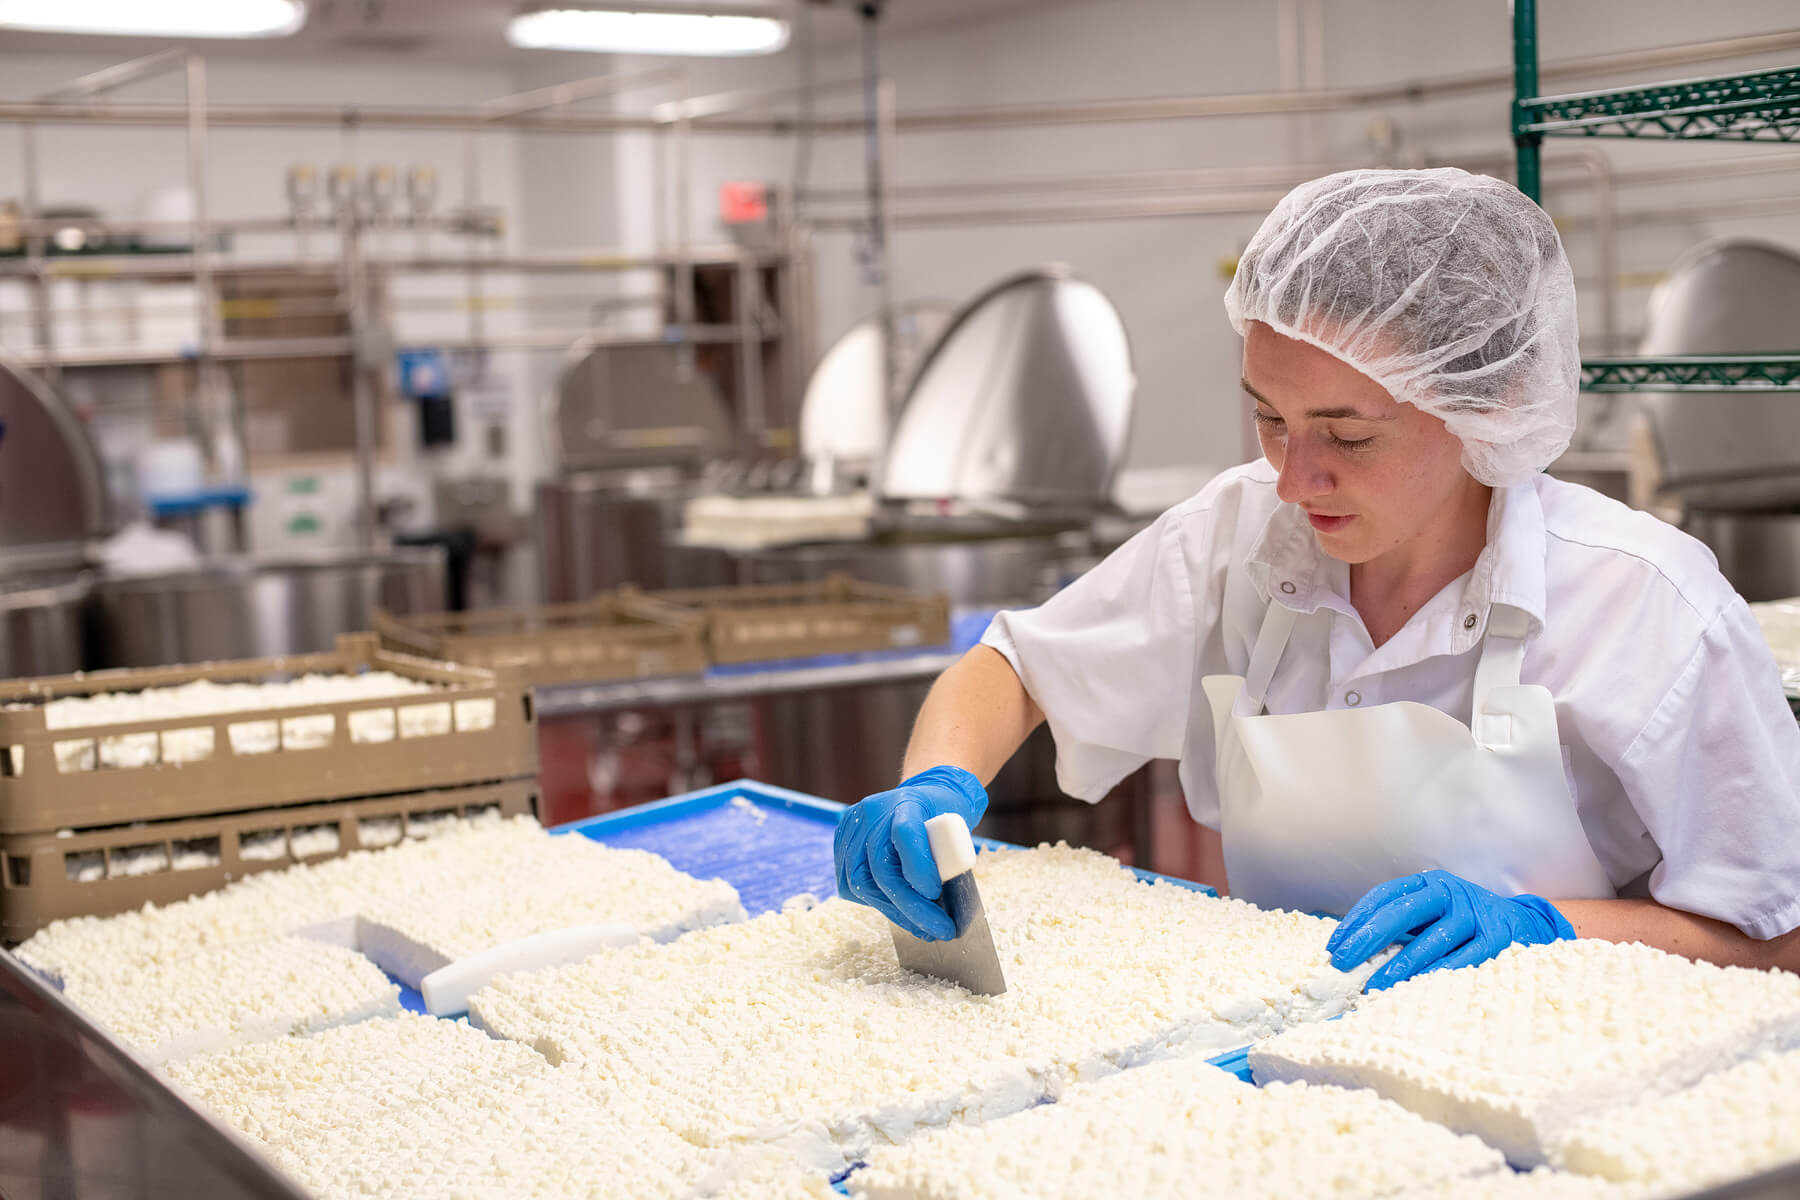 Elizabeth Cornwell manages Caputo Brothers Creamery's plant in Spring Grove, Pennsylvania. The company has seen a 95 percent dropoff in restaurant orders due to the Covid-19 pandemic. (March 2020)